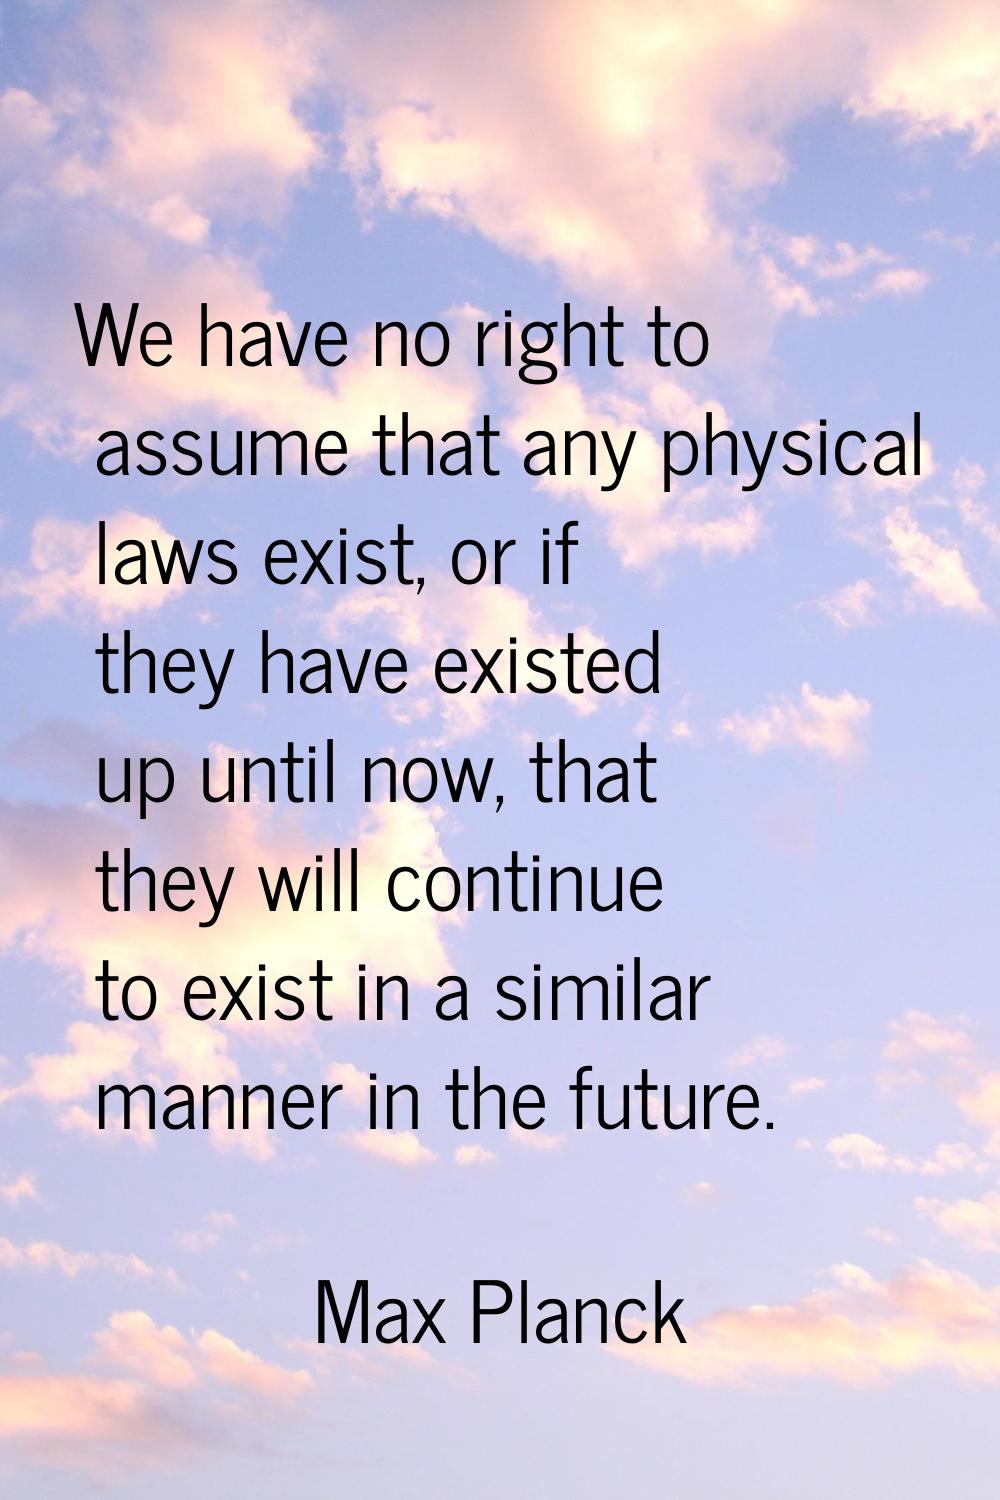 We have no right to assume that any physical laws exist, or if they have existed up until now, that